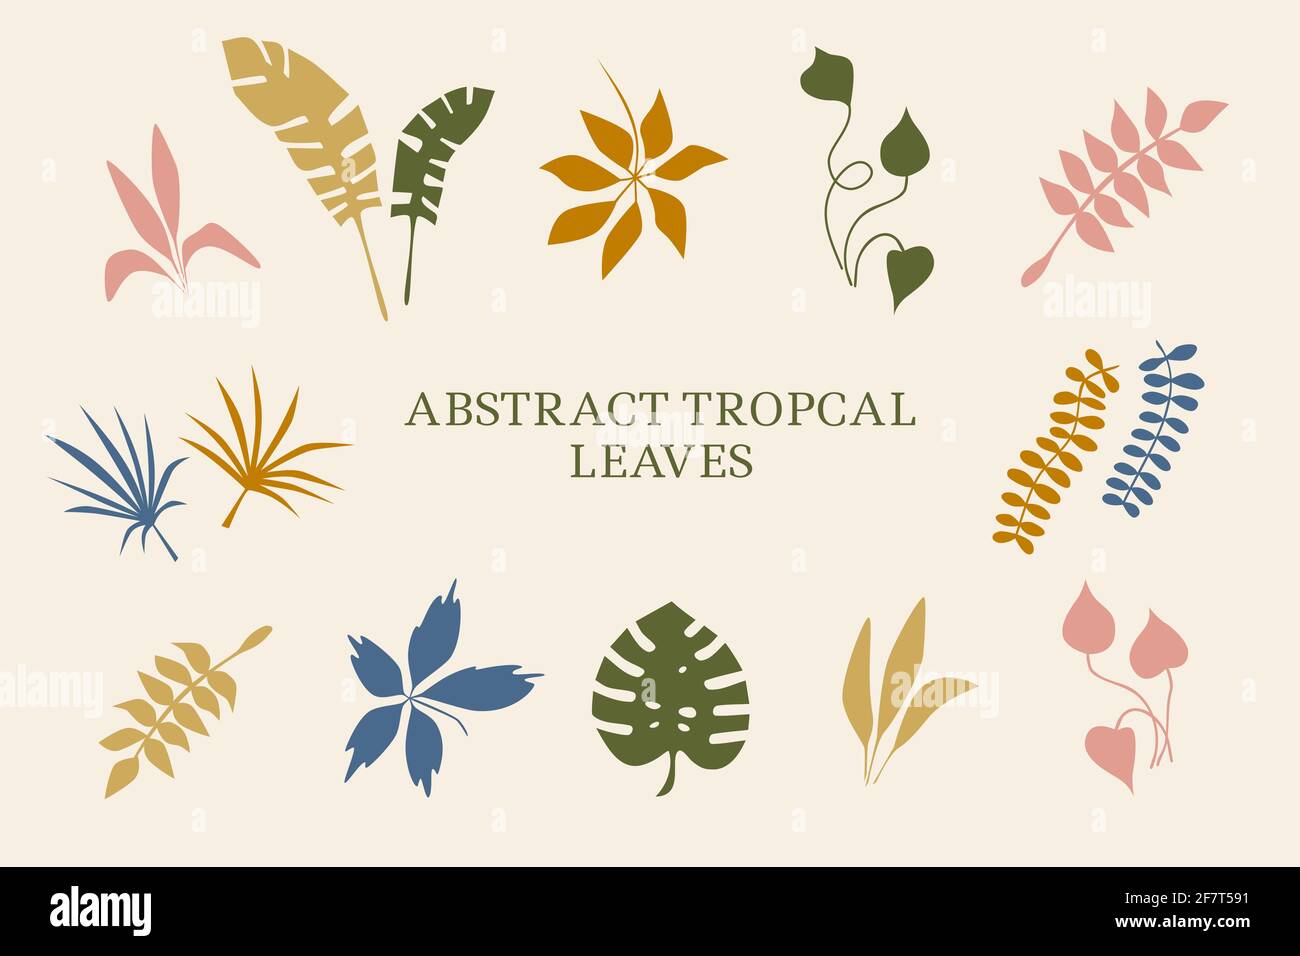 Tropical plants, leaves. Summertime nature objects. Jungle, modern trendy style. Set elements for design of card, poster and banner vector illustratio Stock Vector